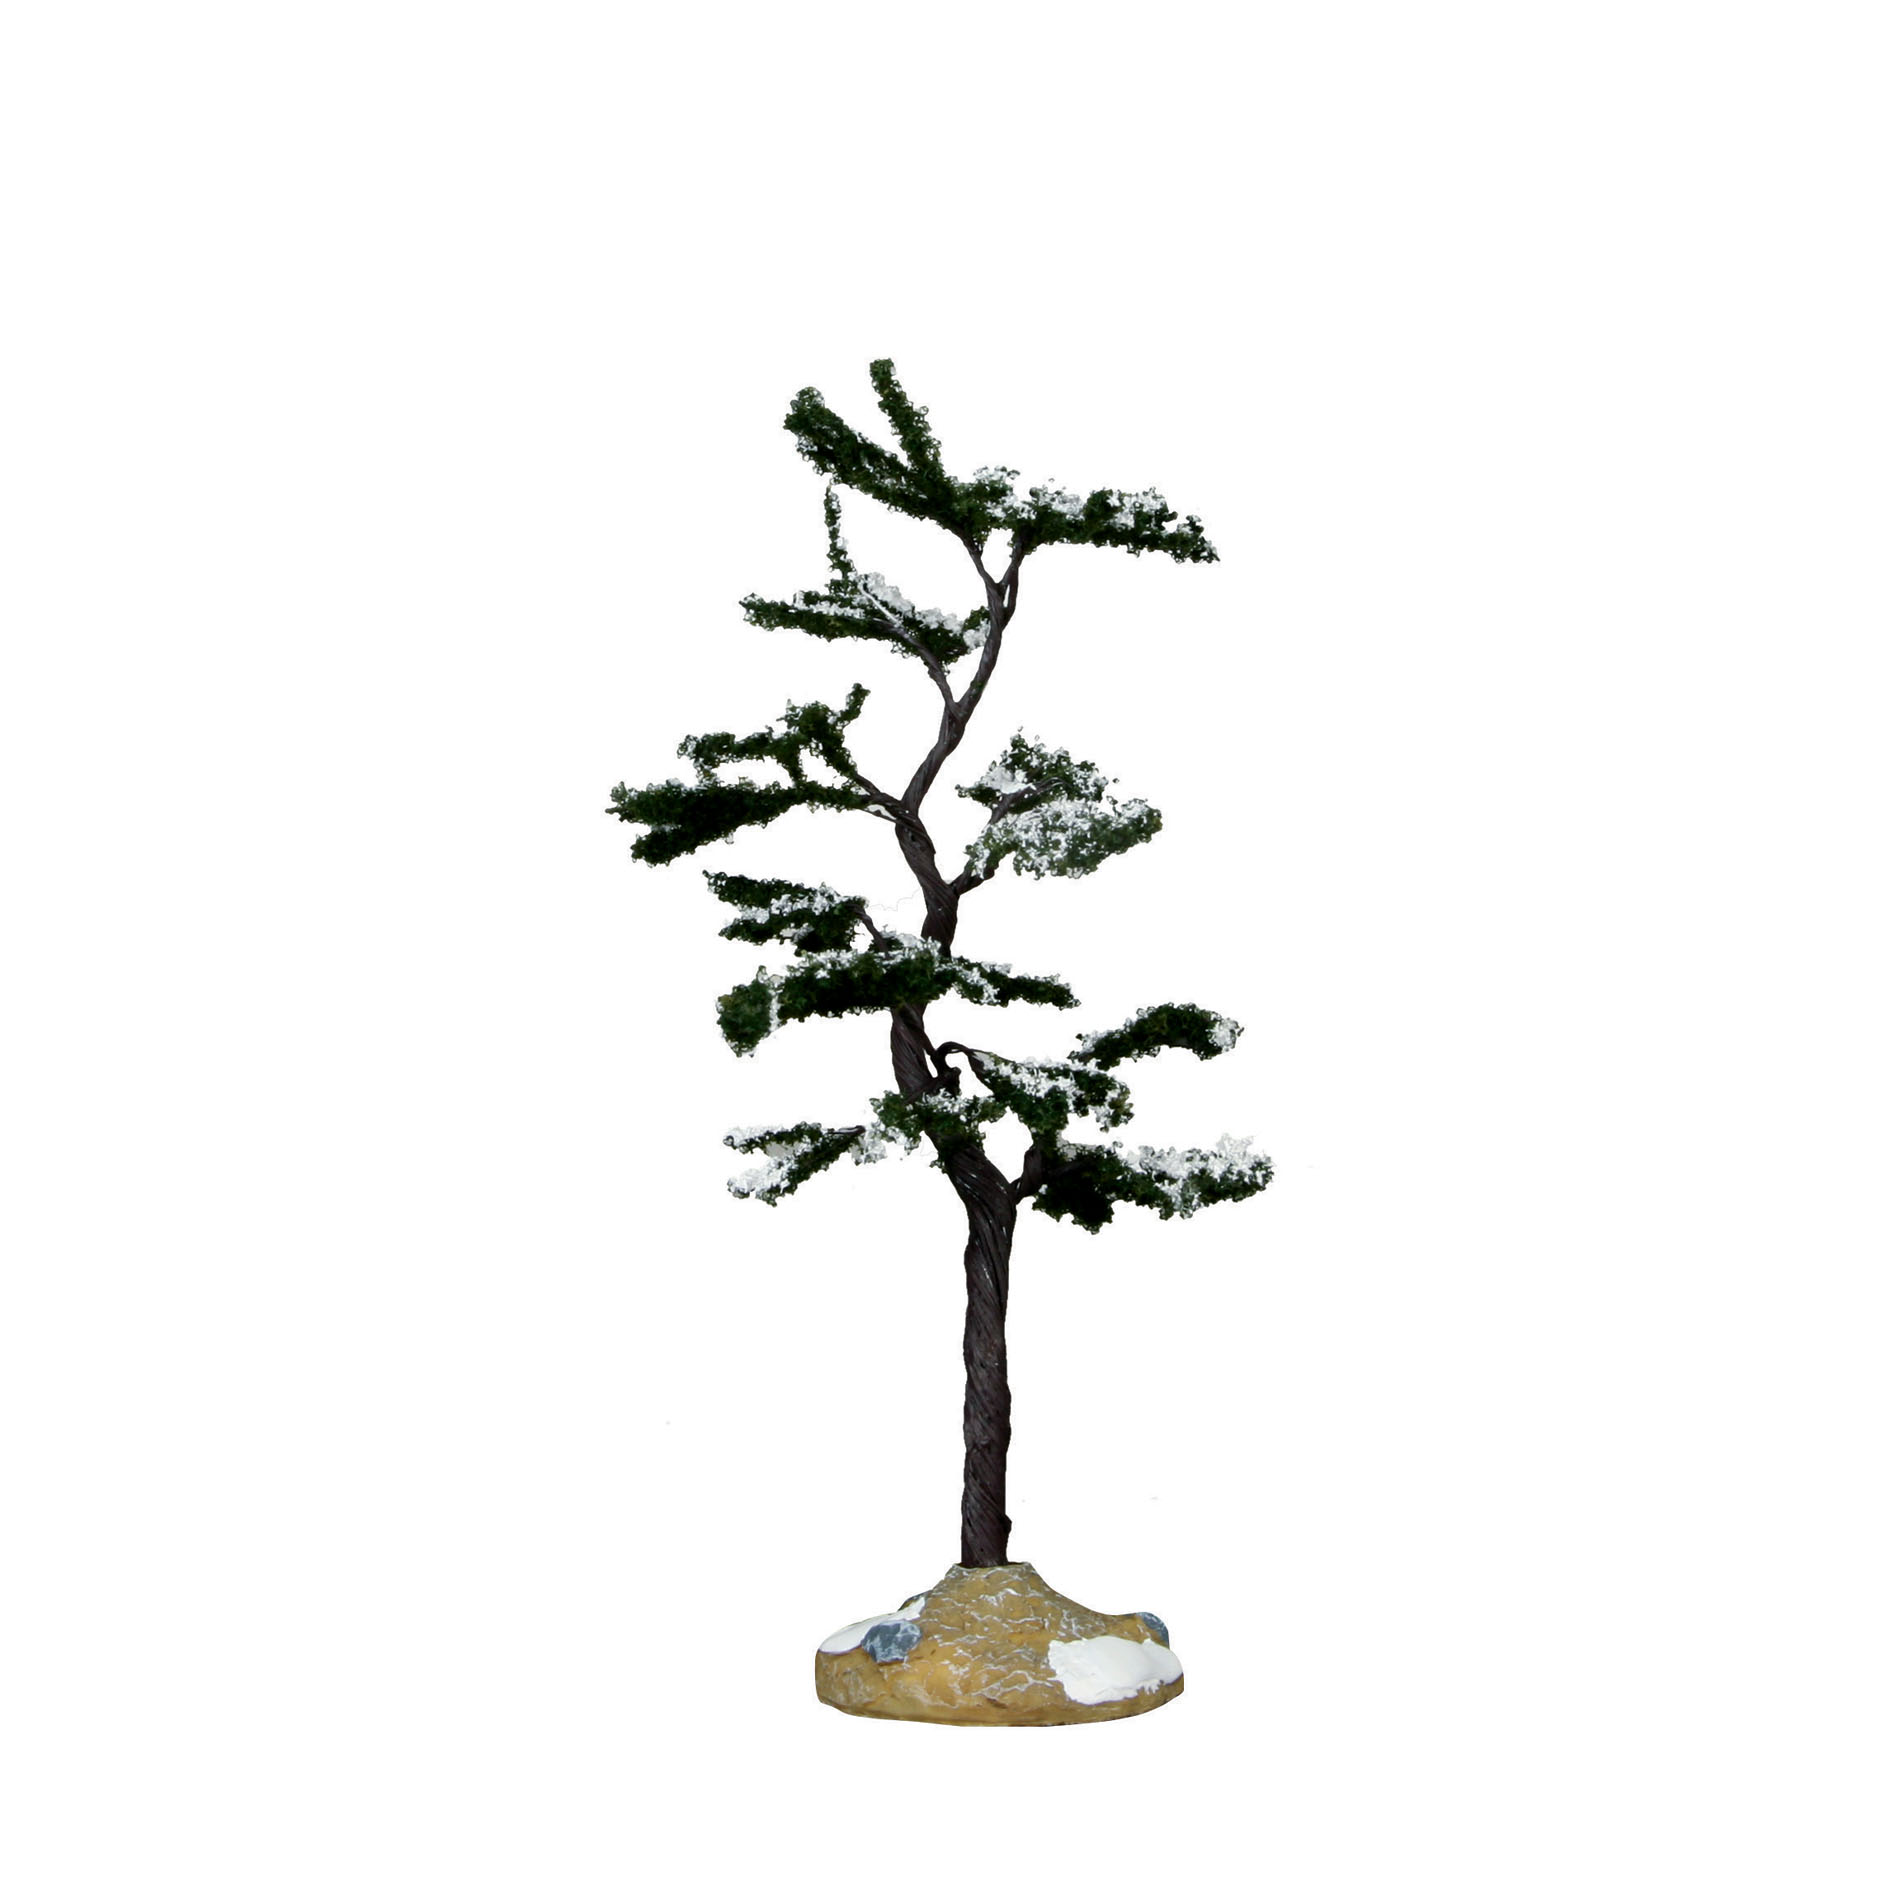 Lemax Village Collection Christmas Village Tree, Marcescent Tree, Small